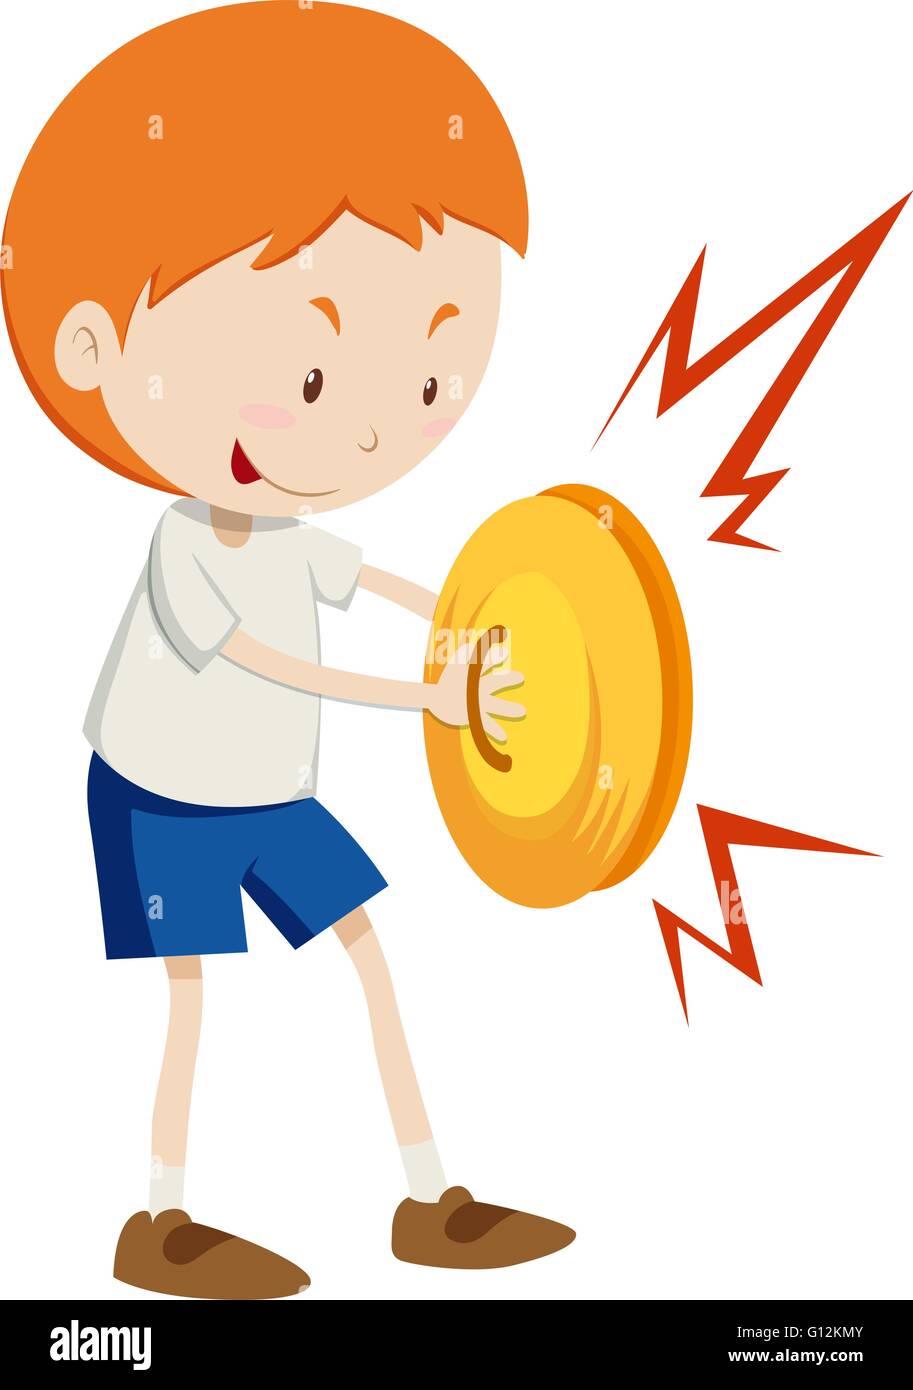 Little boy playing cymbals illustration Stock Vector